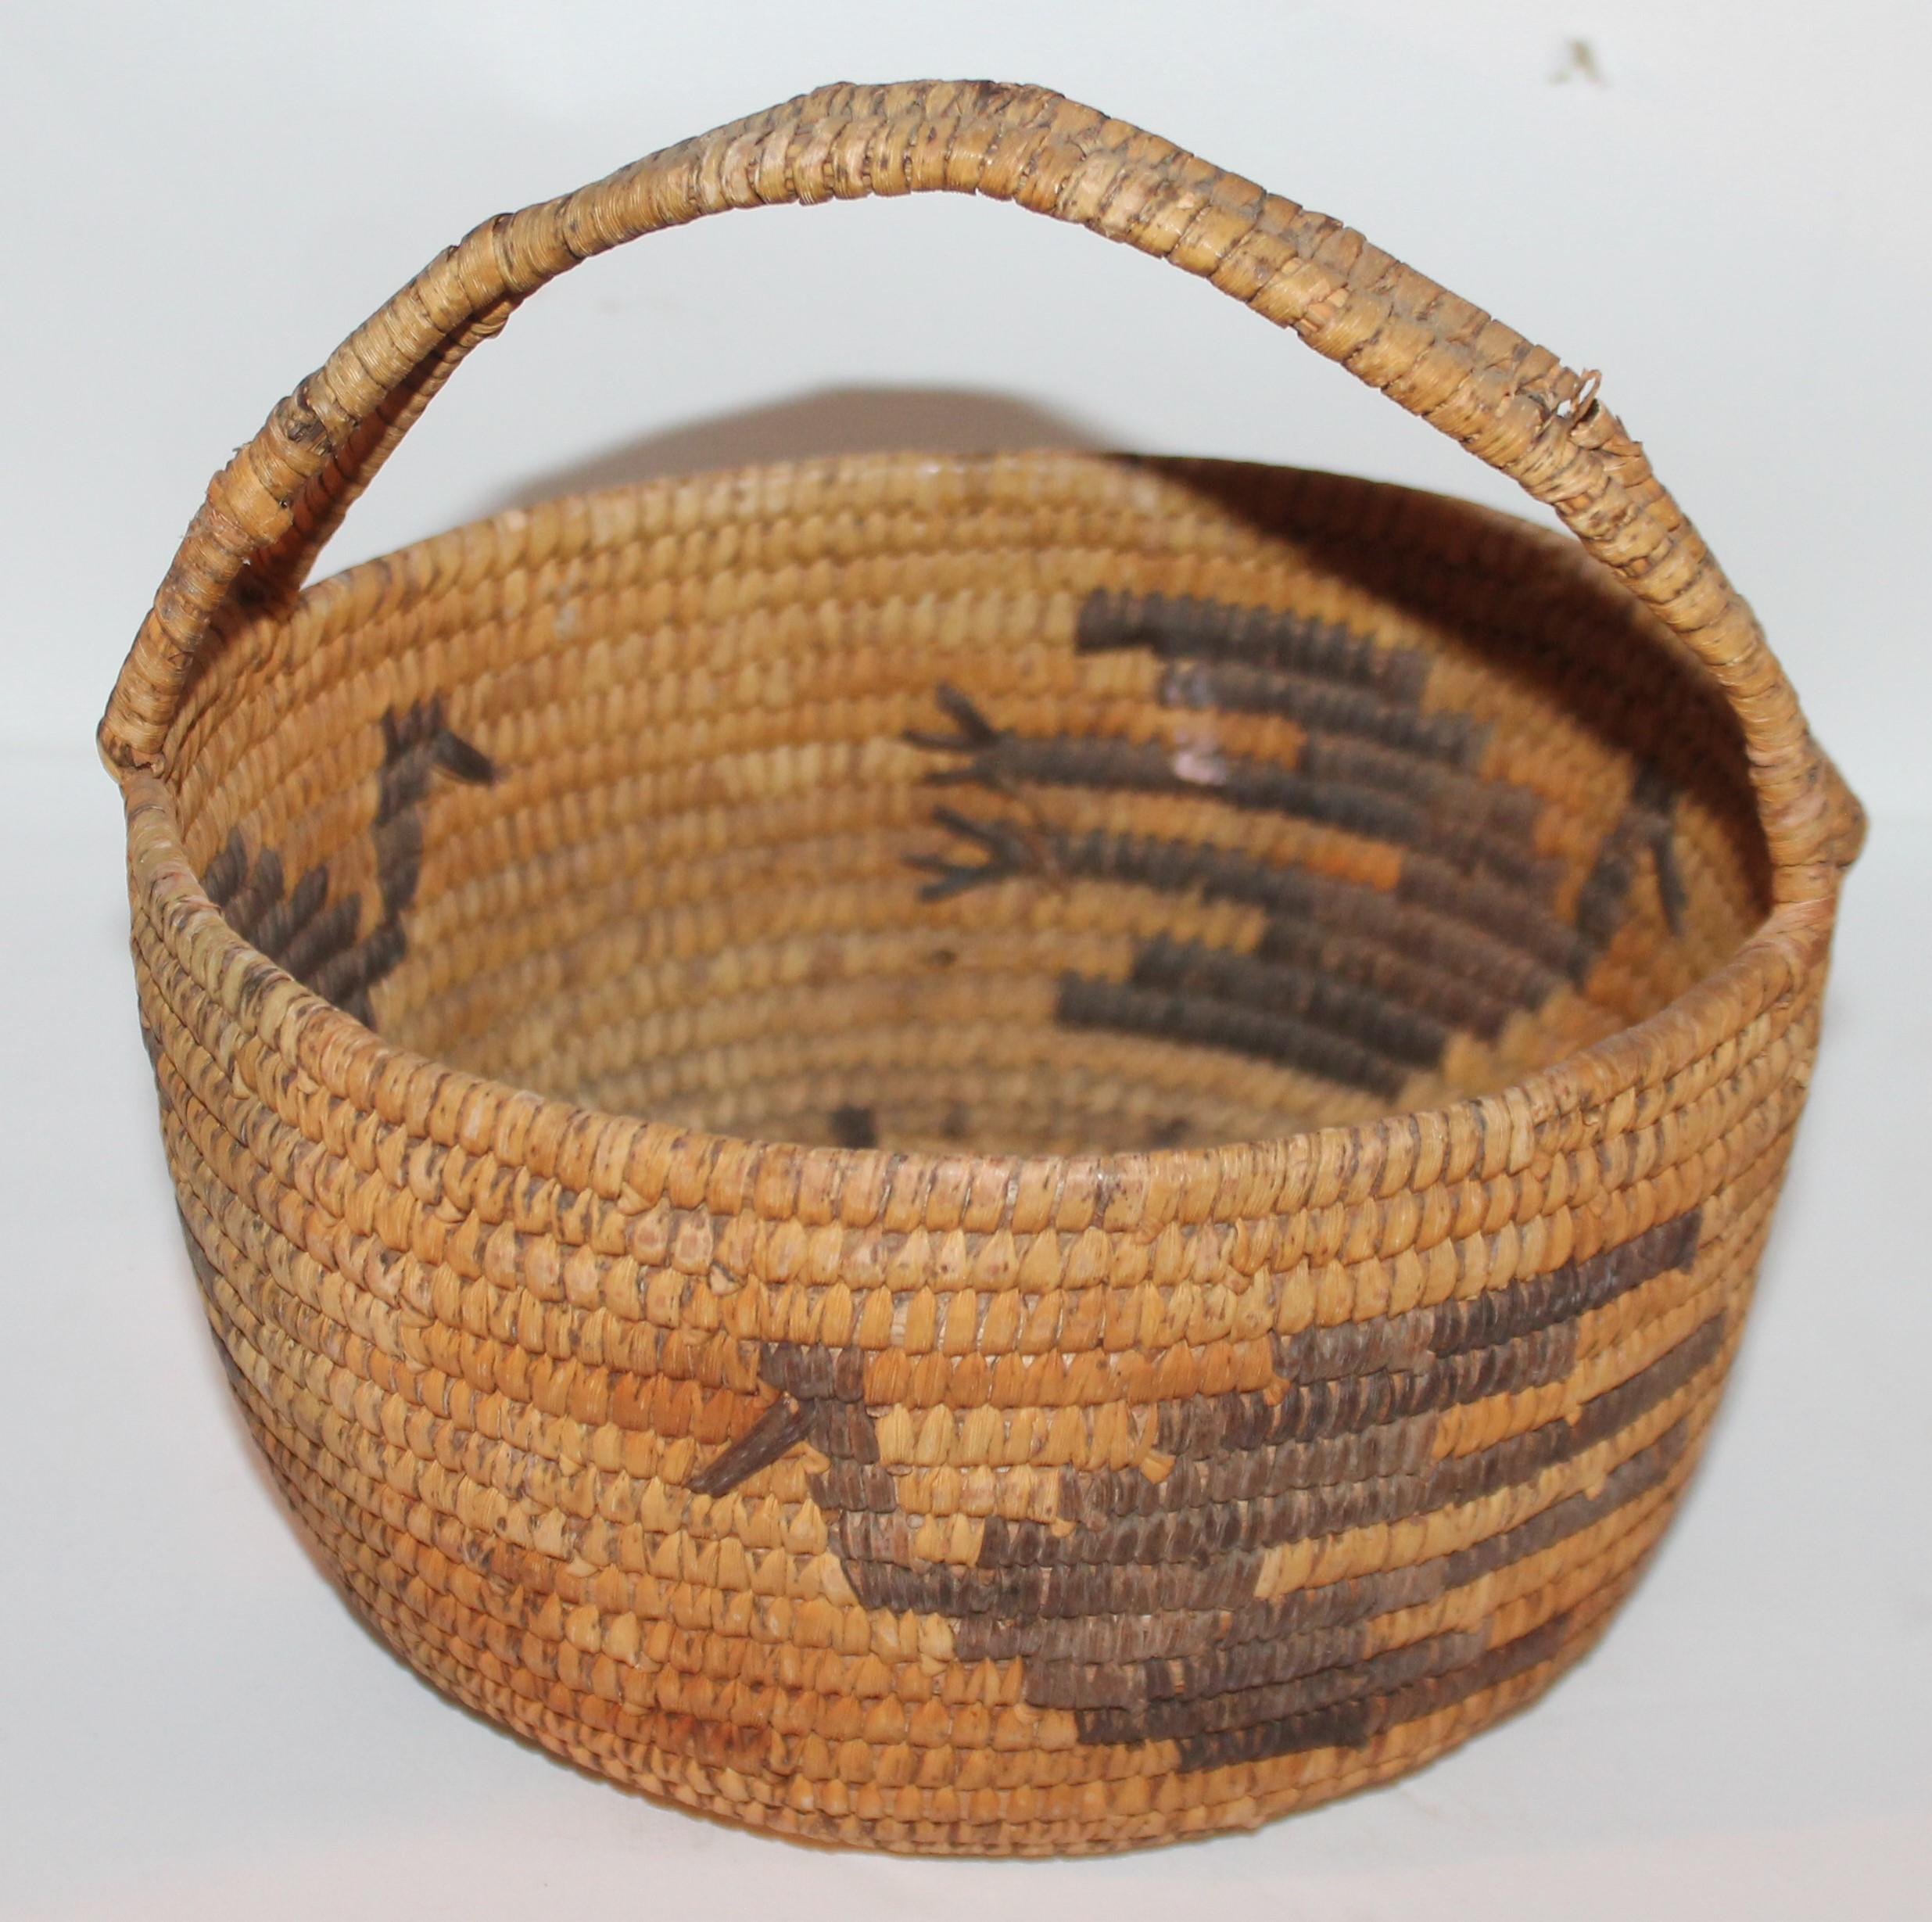 This Papago Indian handled basket is in good condition with a birds in flight. There are three birds total in flight.